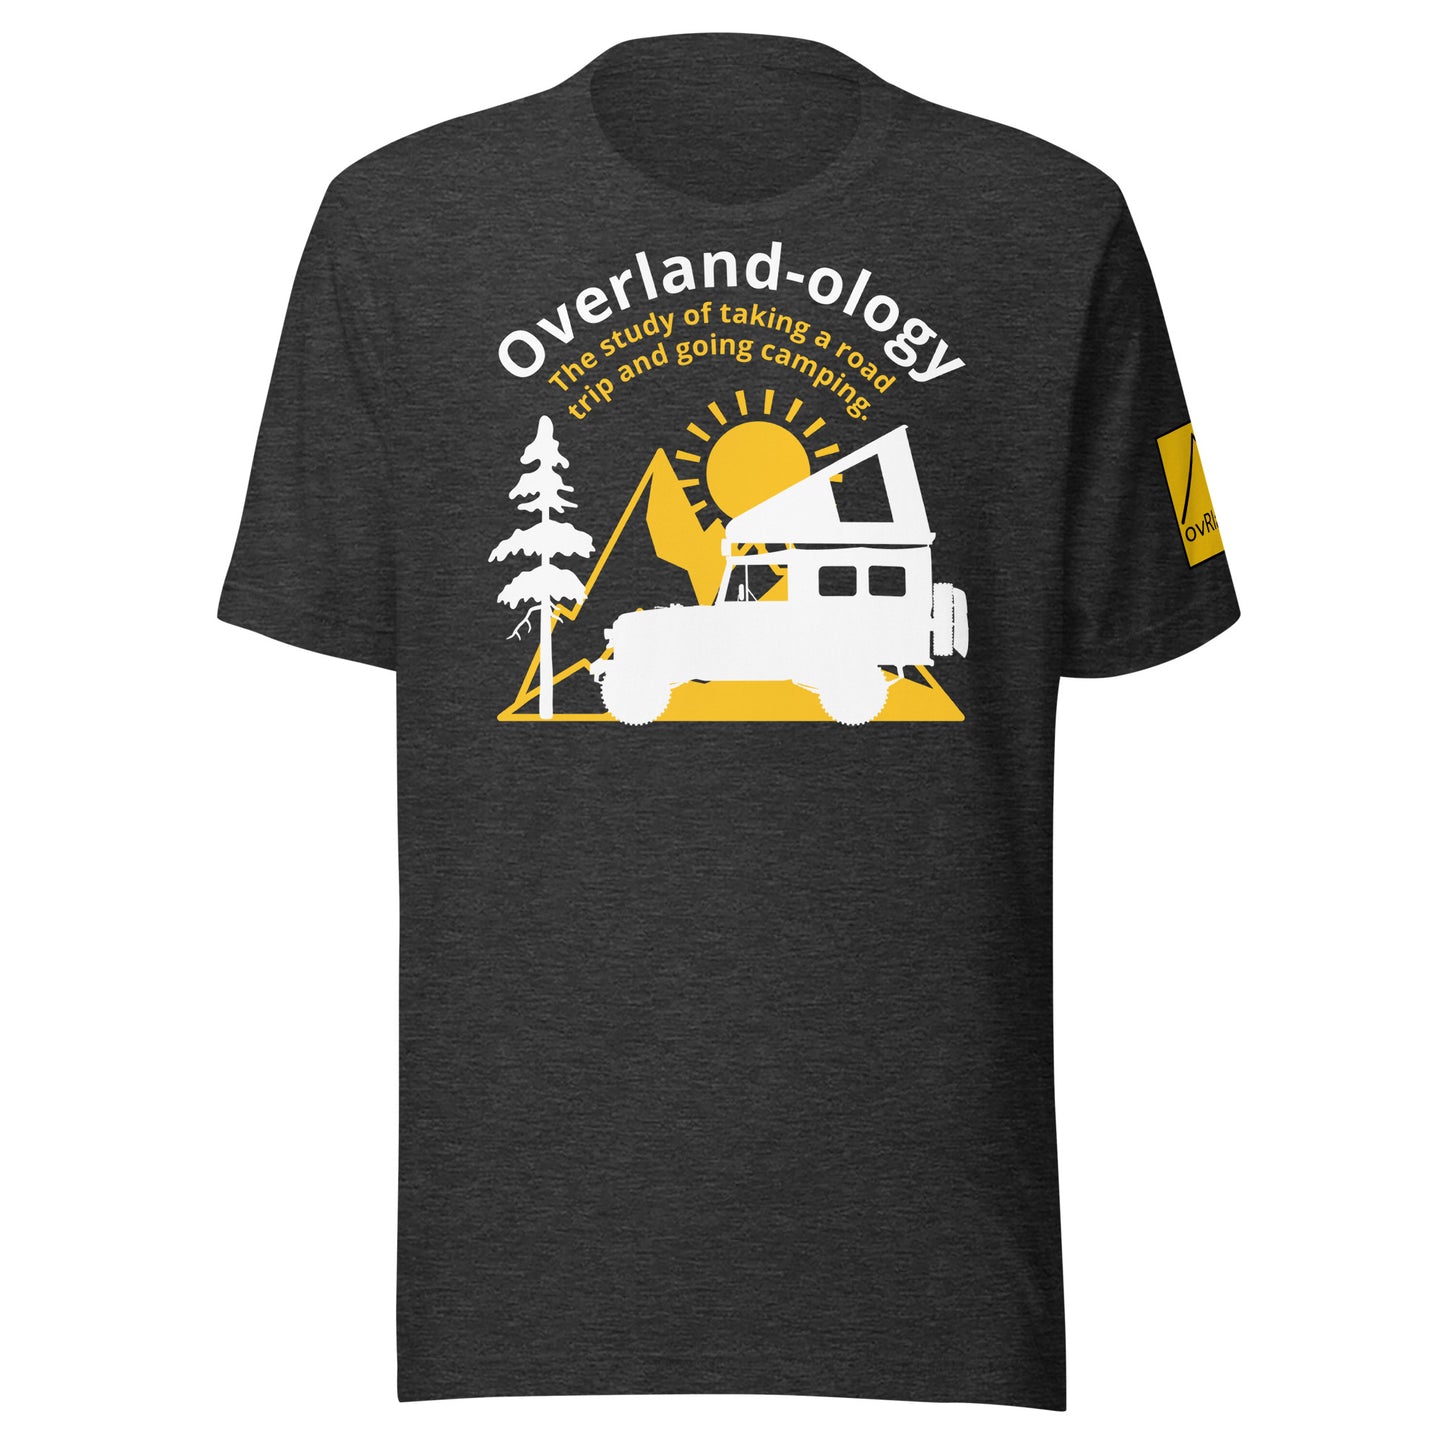 Overland-ology - The study of taking a road trip and going camping. Dark Grey t-shirt. overland365.com